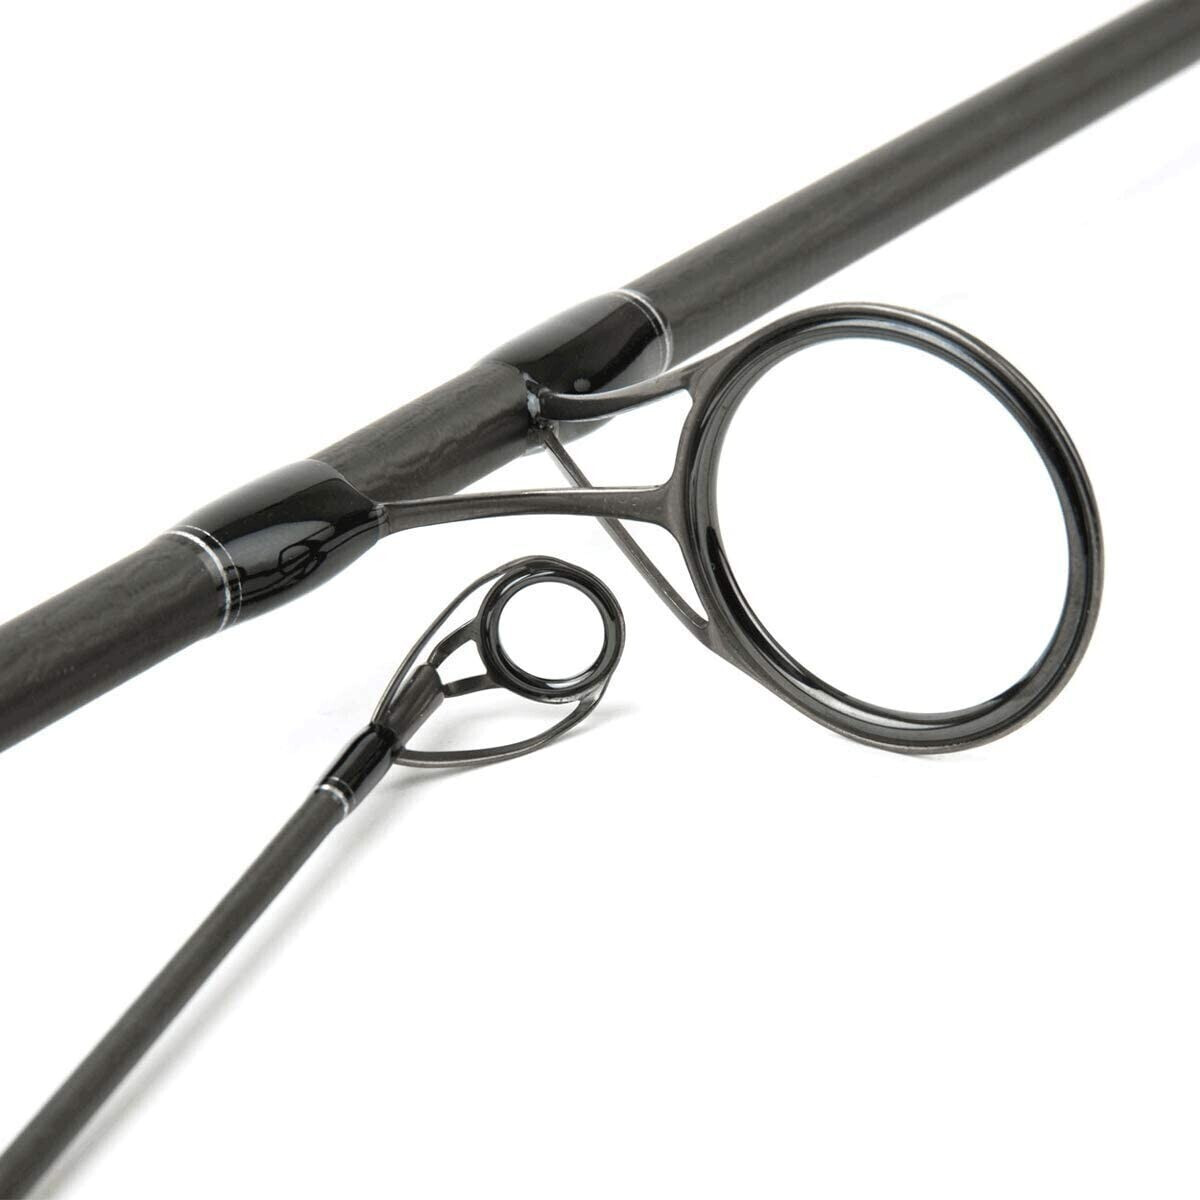 Buy Sonik Vader X RS Carp 12 ft Fishing Rod from £60.99 (Today